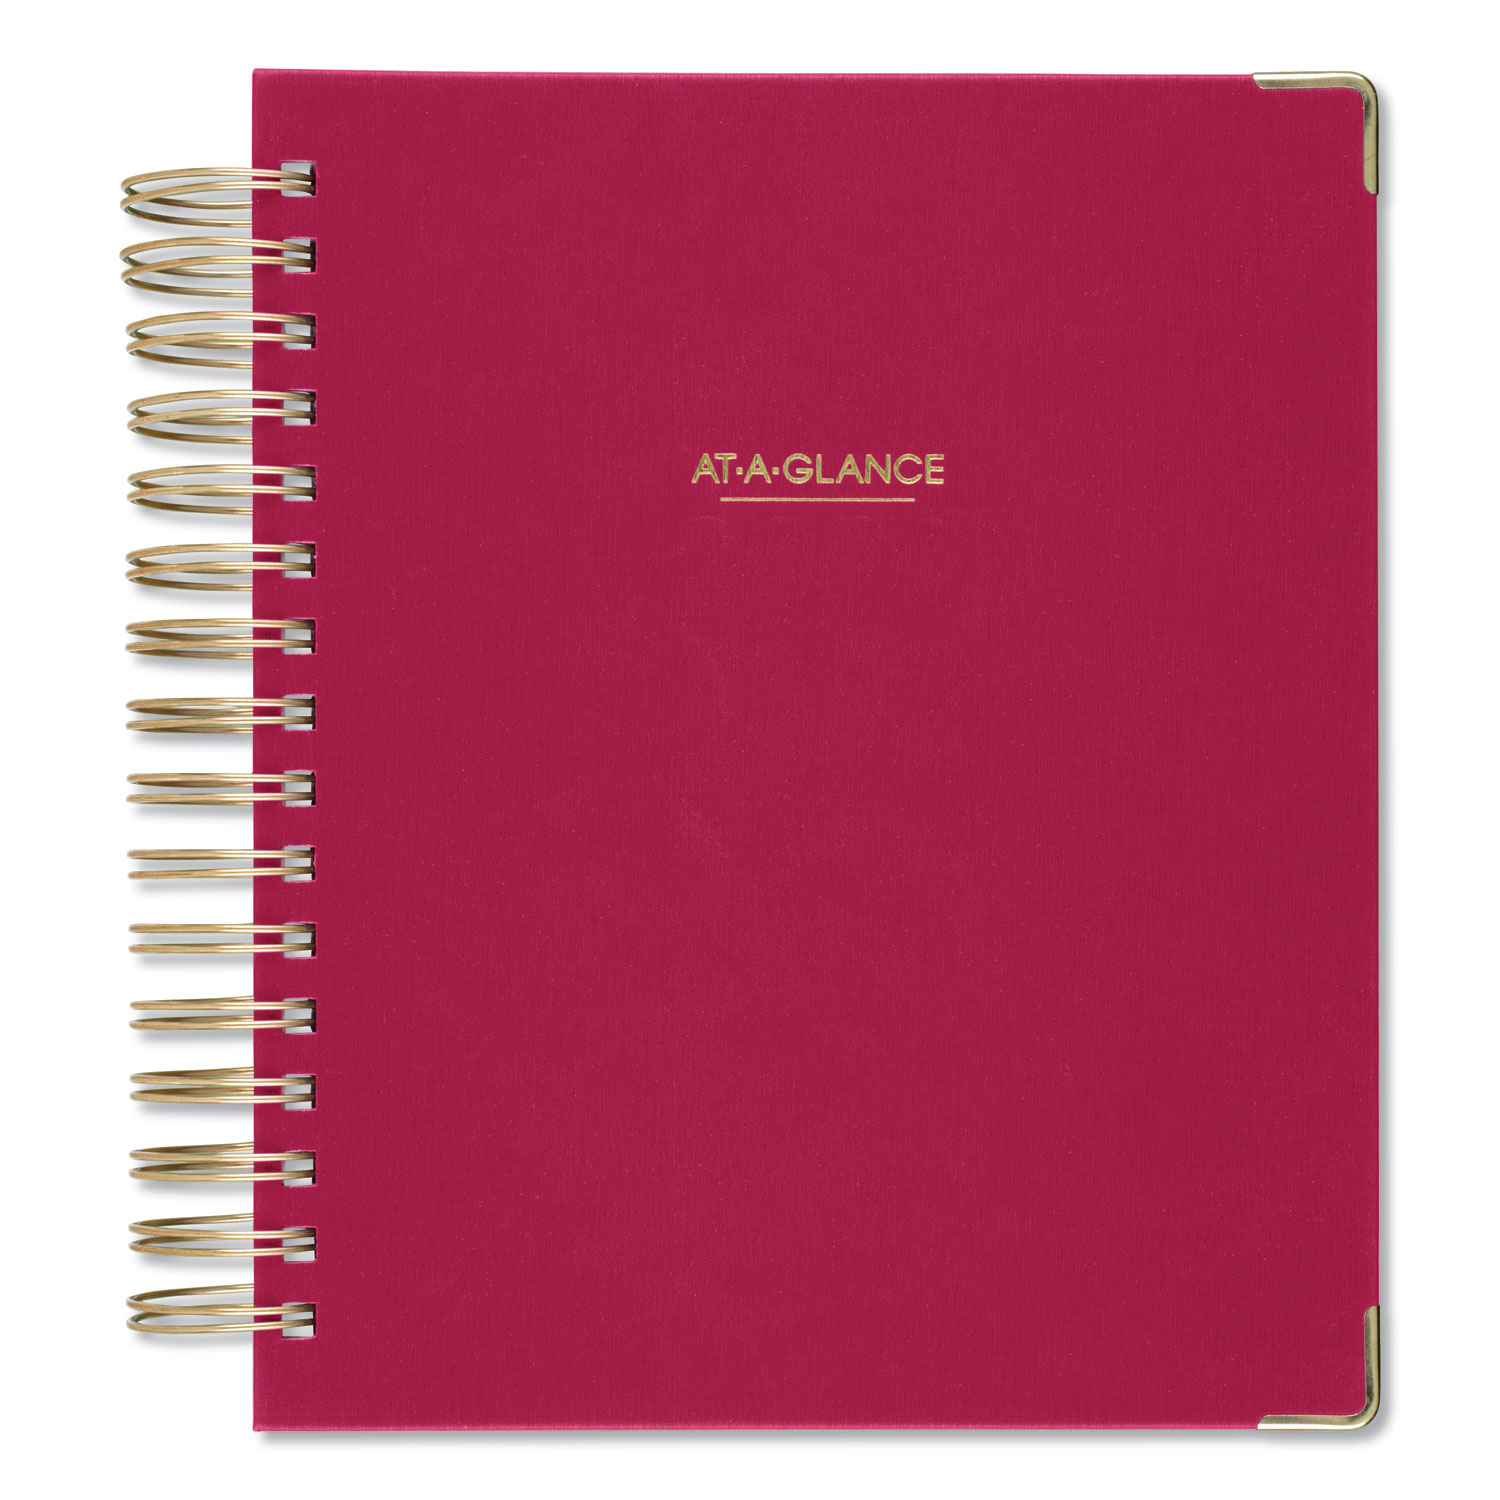  AT-A-GLANCE 609980659 Harmony Daily Hardcover Planner, 8 3/4 x 6 7/8, Berry, 2020 (AAG609980659) 